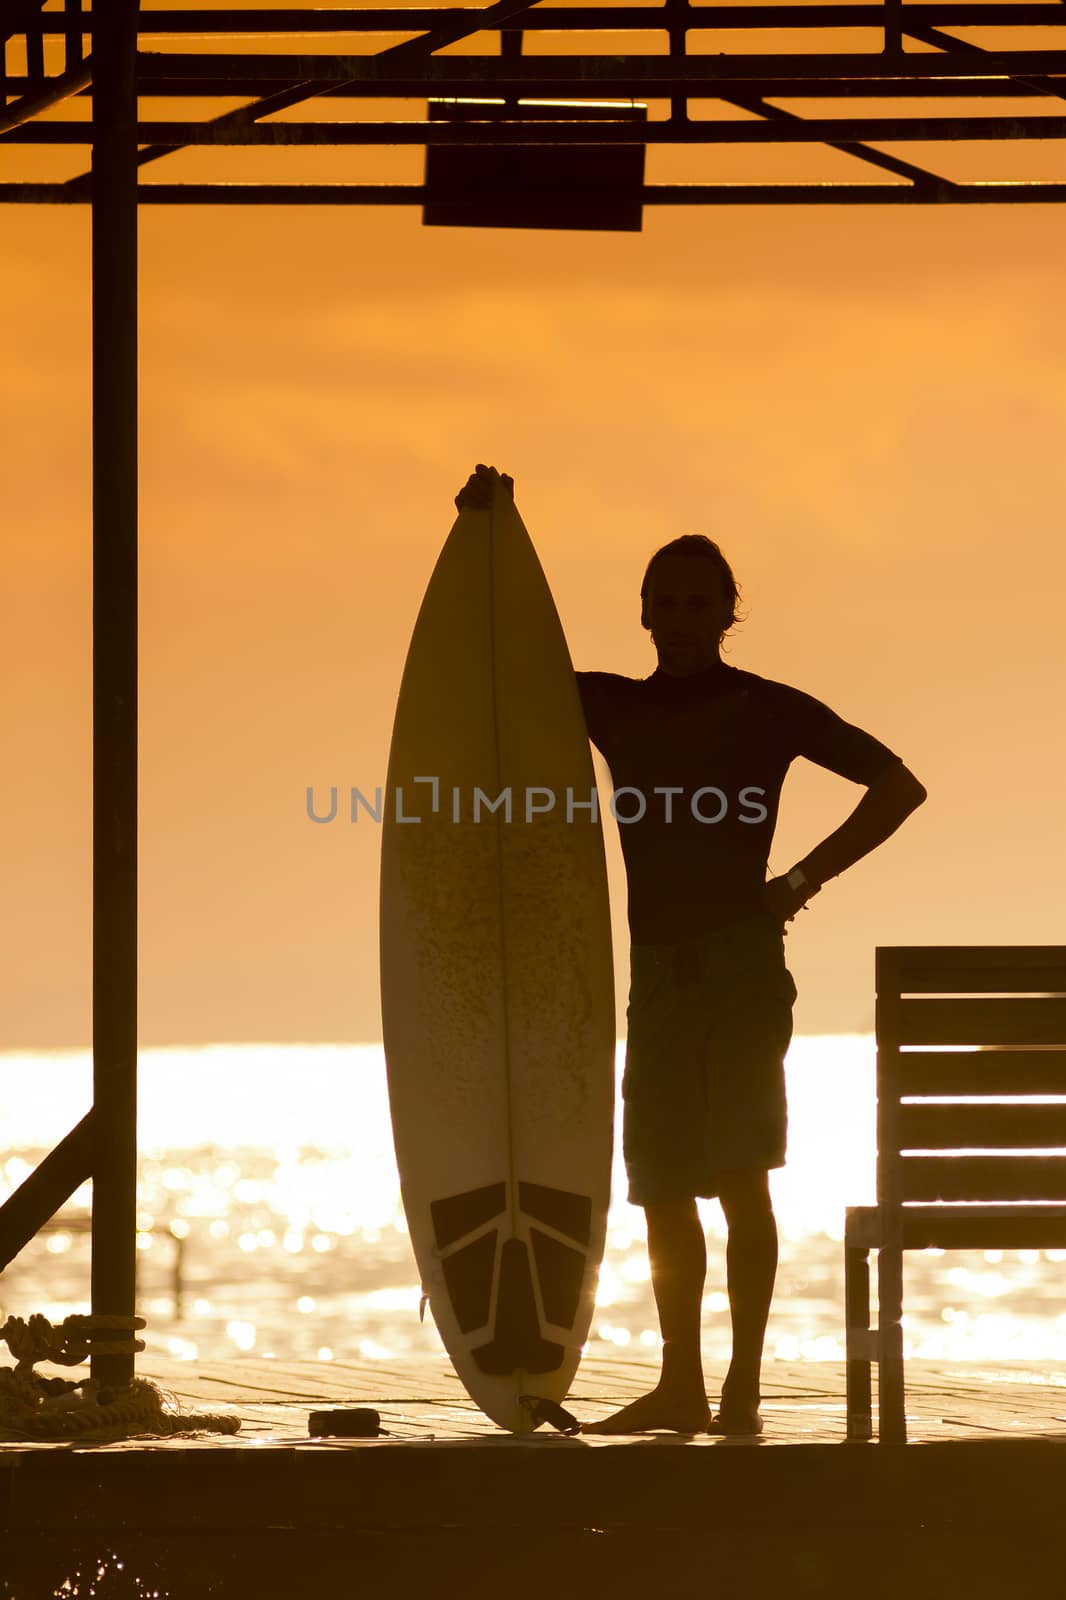 Surfer  with a surfboard at Sunset Tme, Bali, Indonesia
released